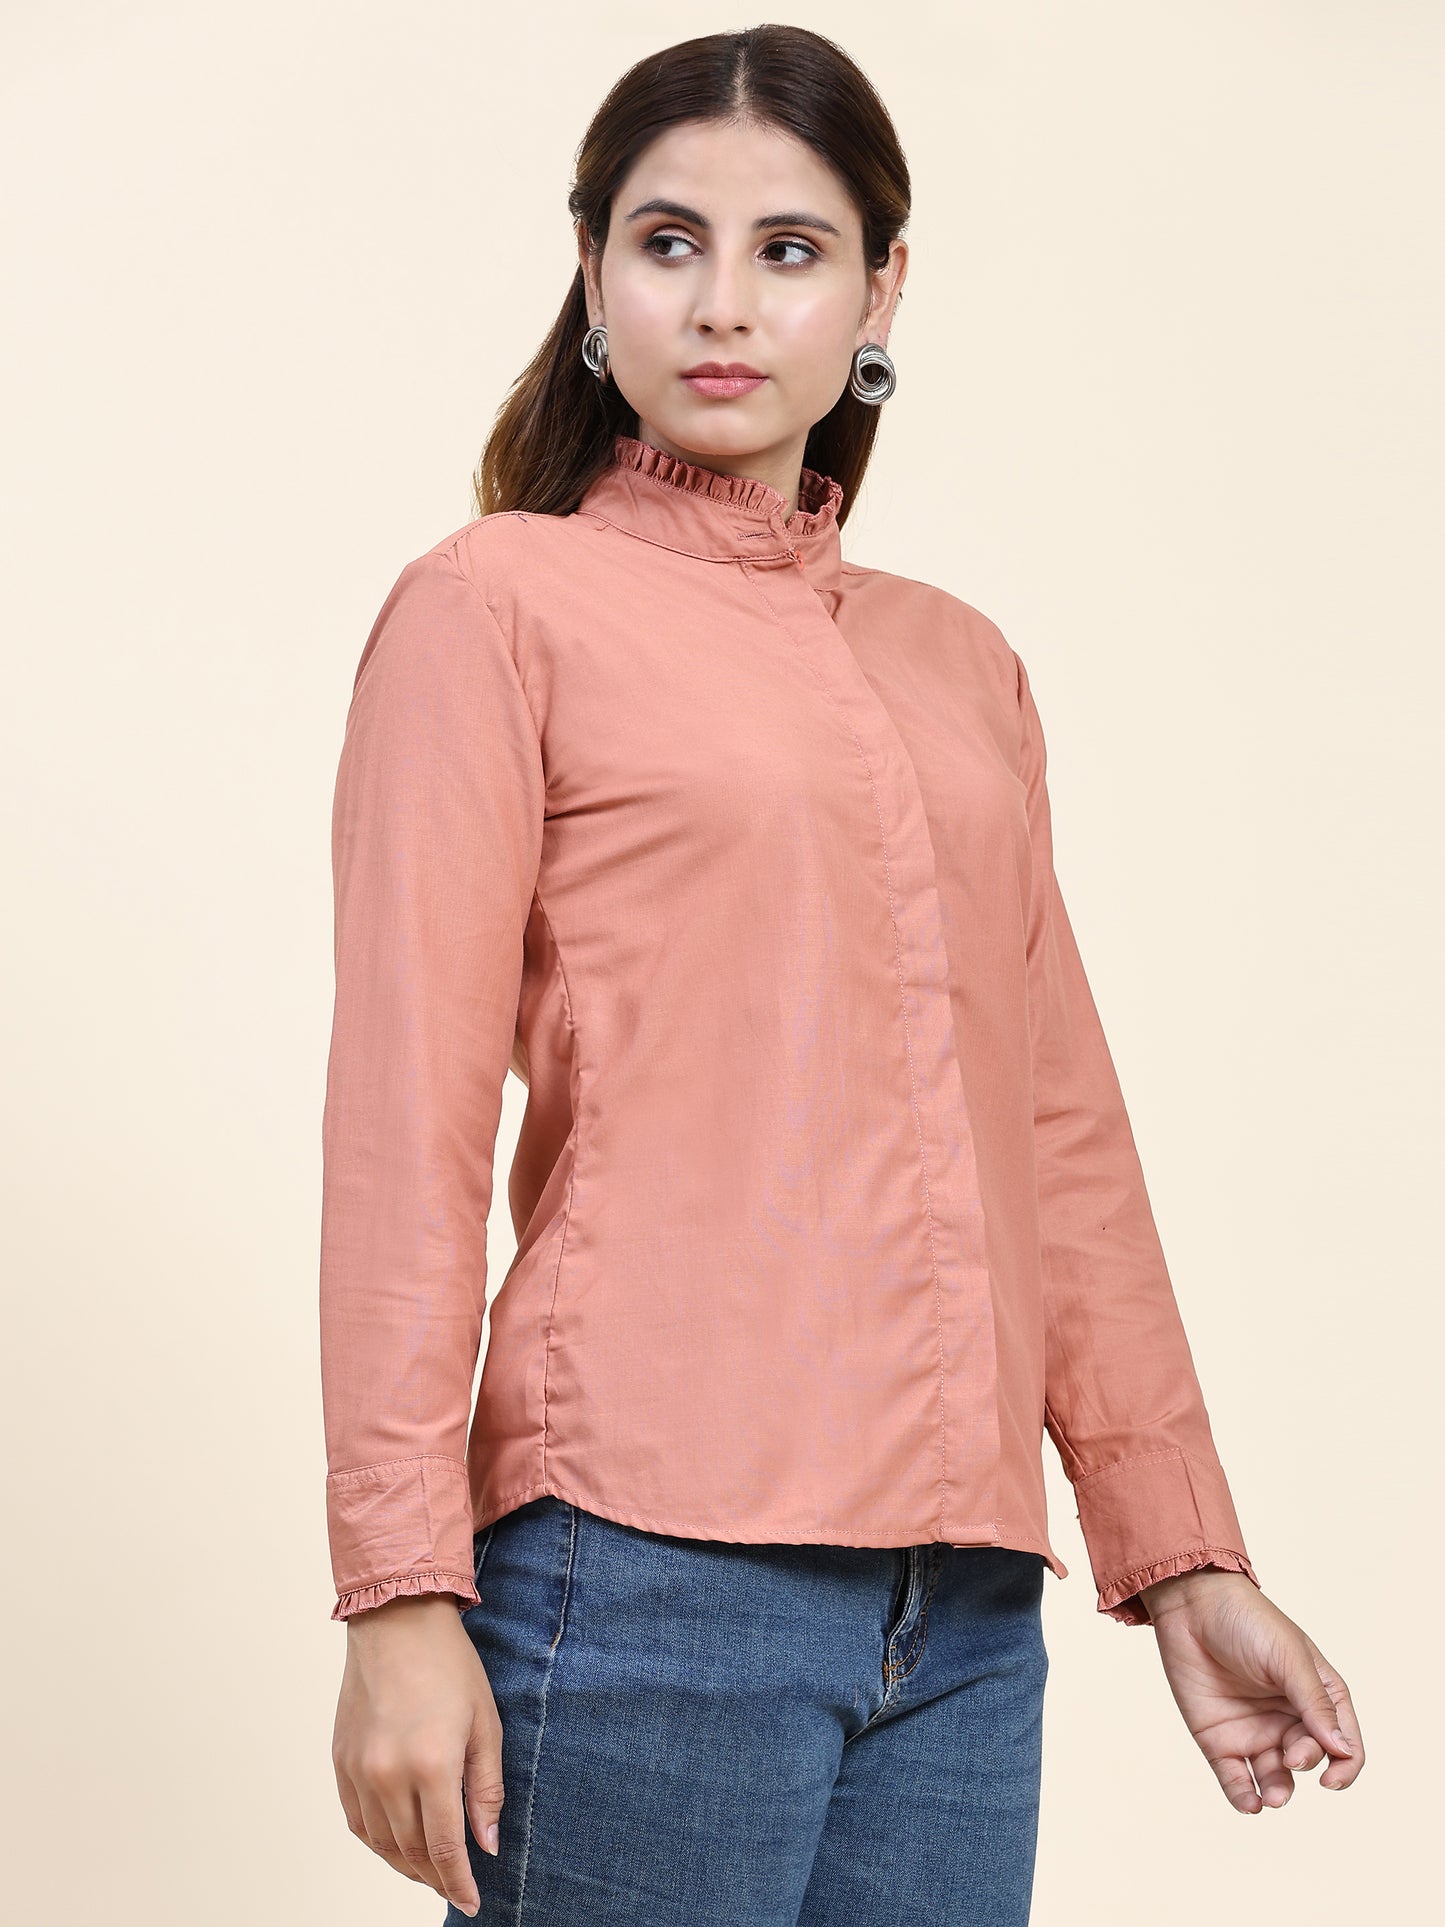 ANUSHIL Women's Cotton Shirts : Comfortable and Fashionable with Gathered Neck and Sleeves, Brown